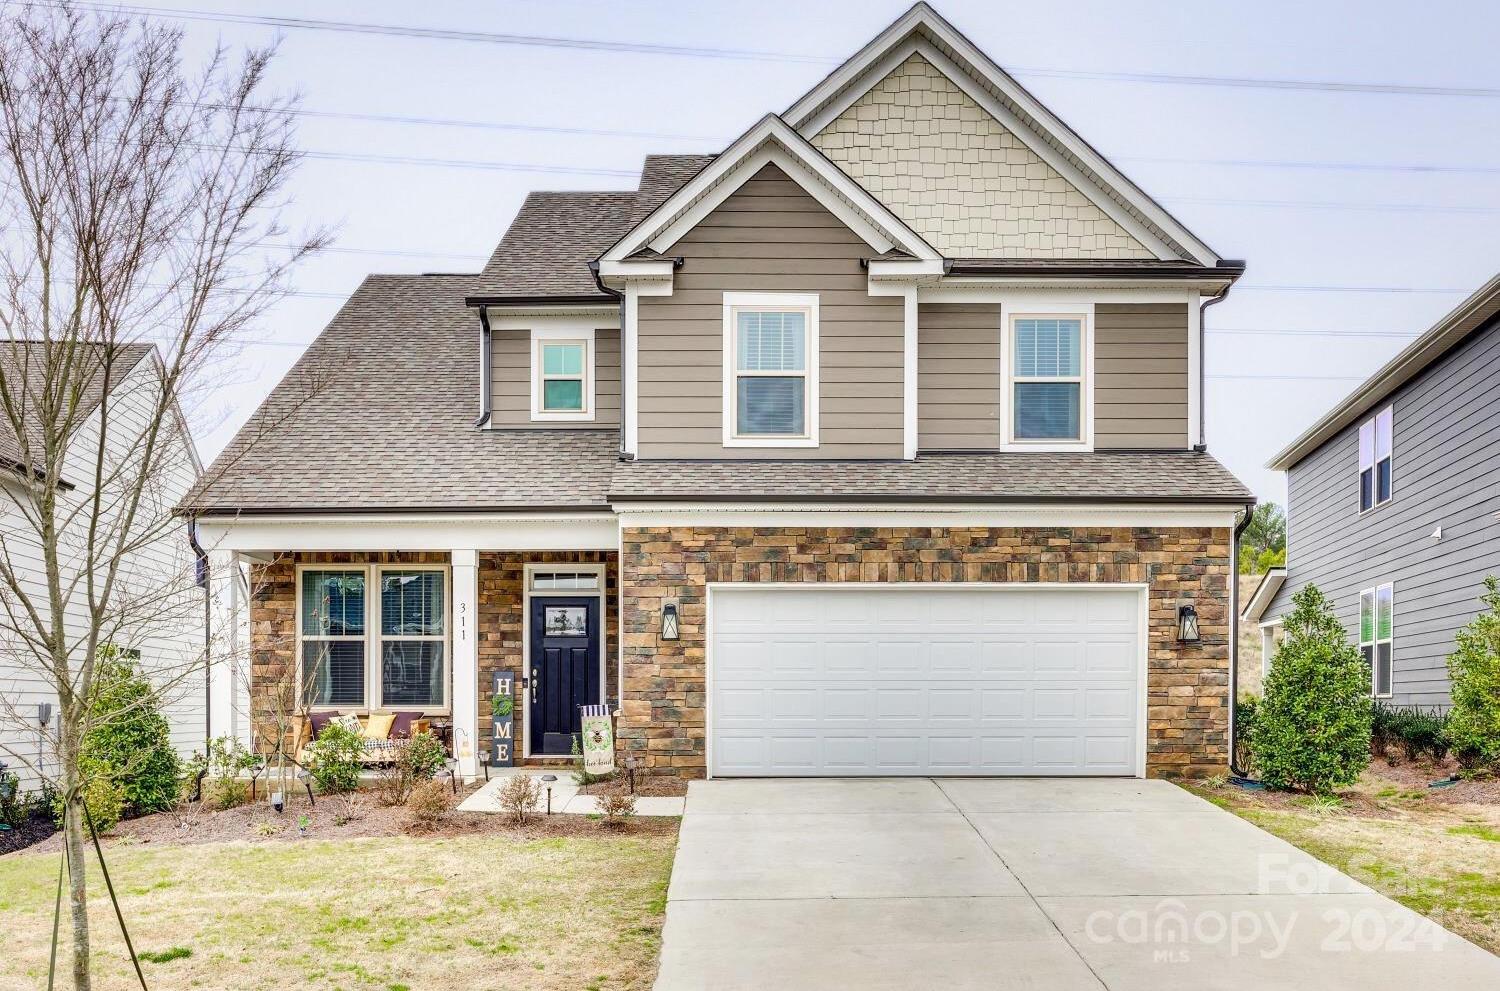 Photo one of 311 Reedy River Ln Clover SC 29710 | MLS 4114365